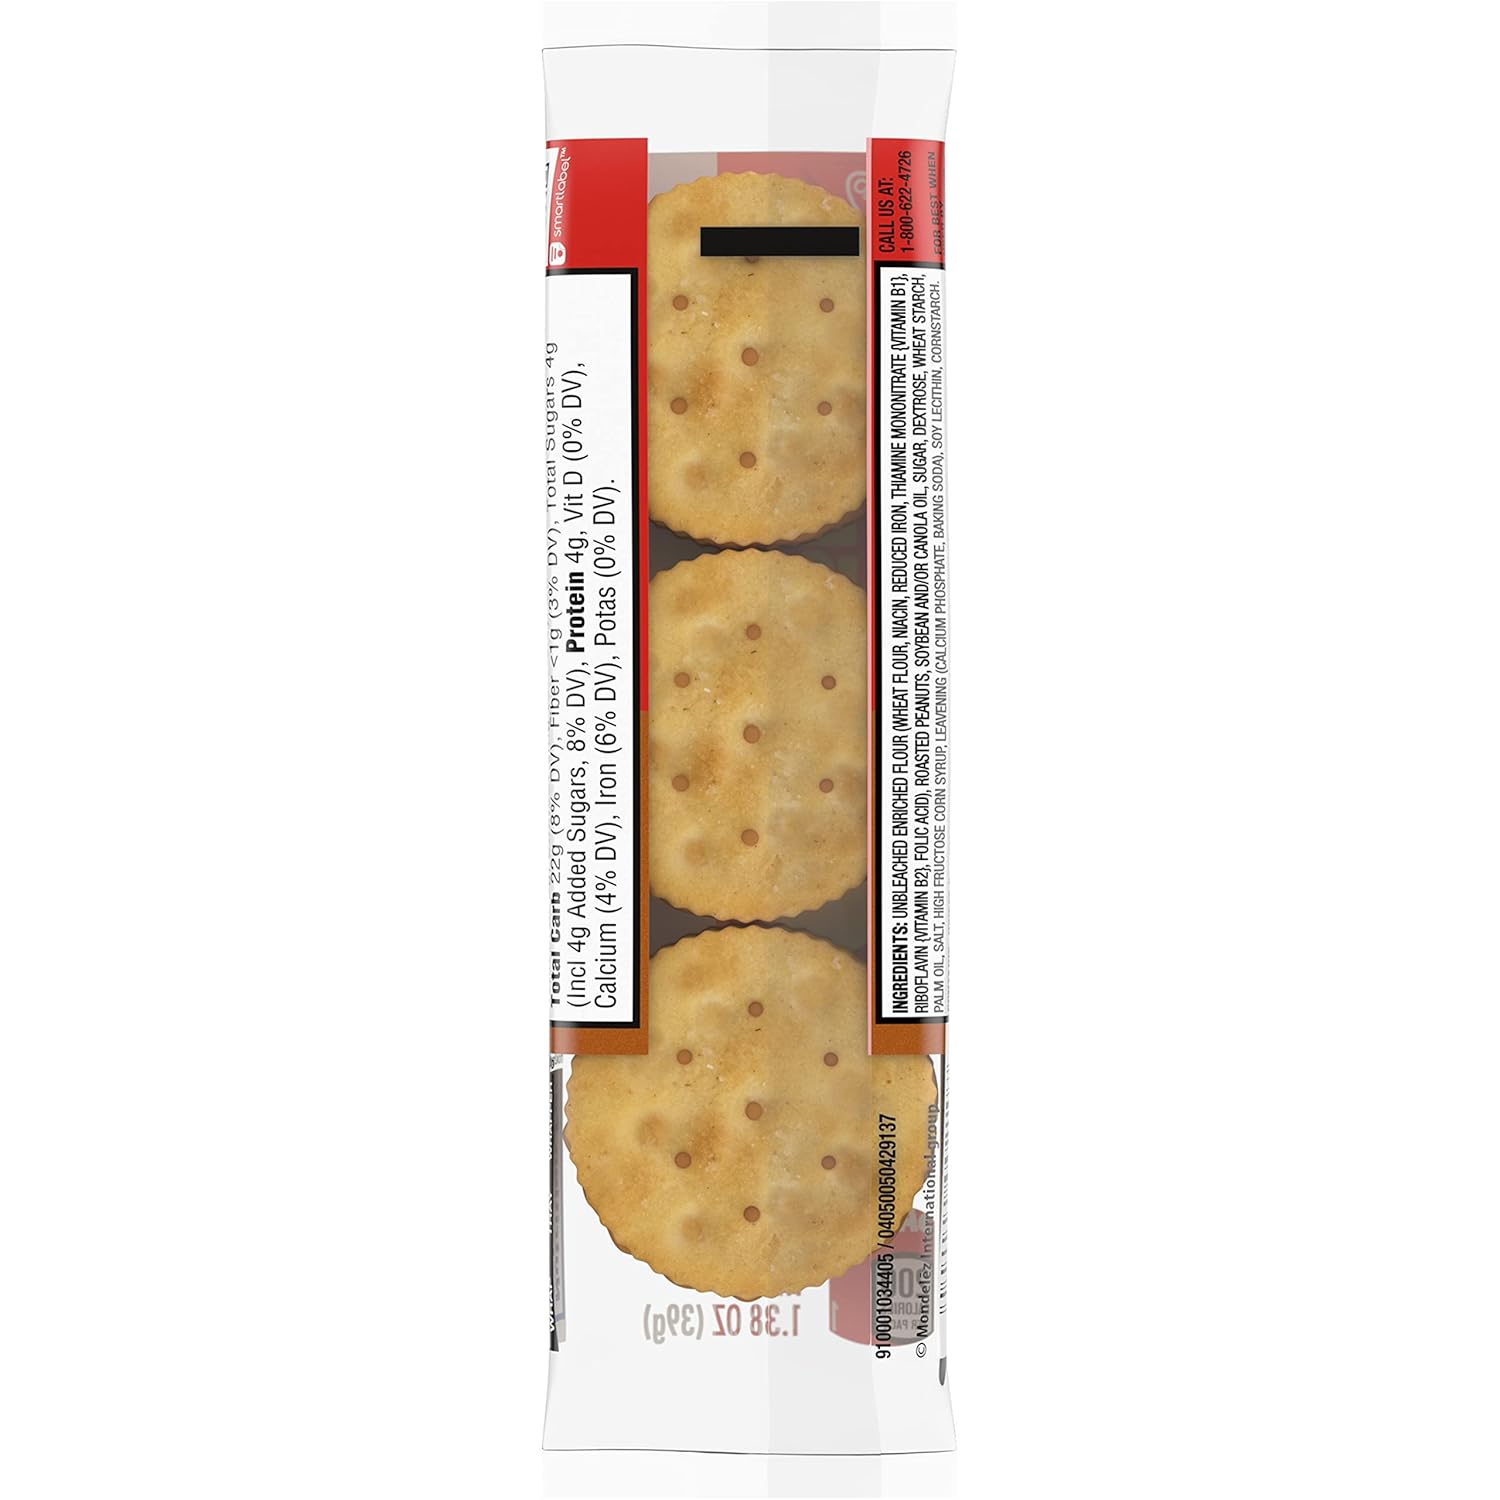 Wholesale prices with free shipping all over United States RITZ Peanut Butter Sandwich Cracker Snacks and Cheese Sandwich Crackers, Snack Crackers Variety Pack, 32 Snack Packs - Steven Deals